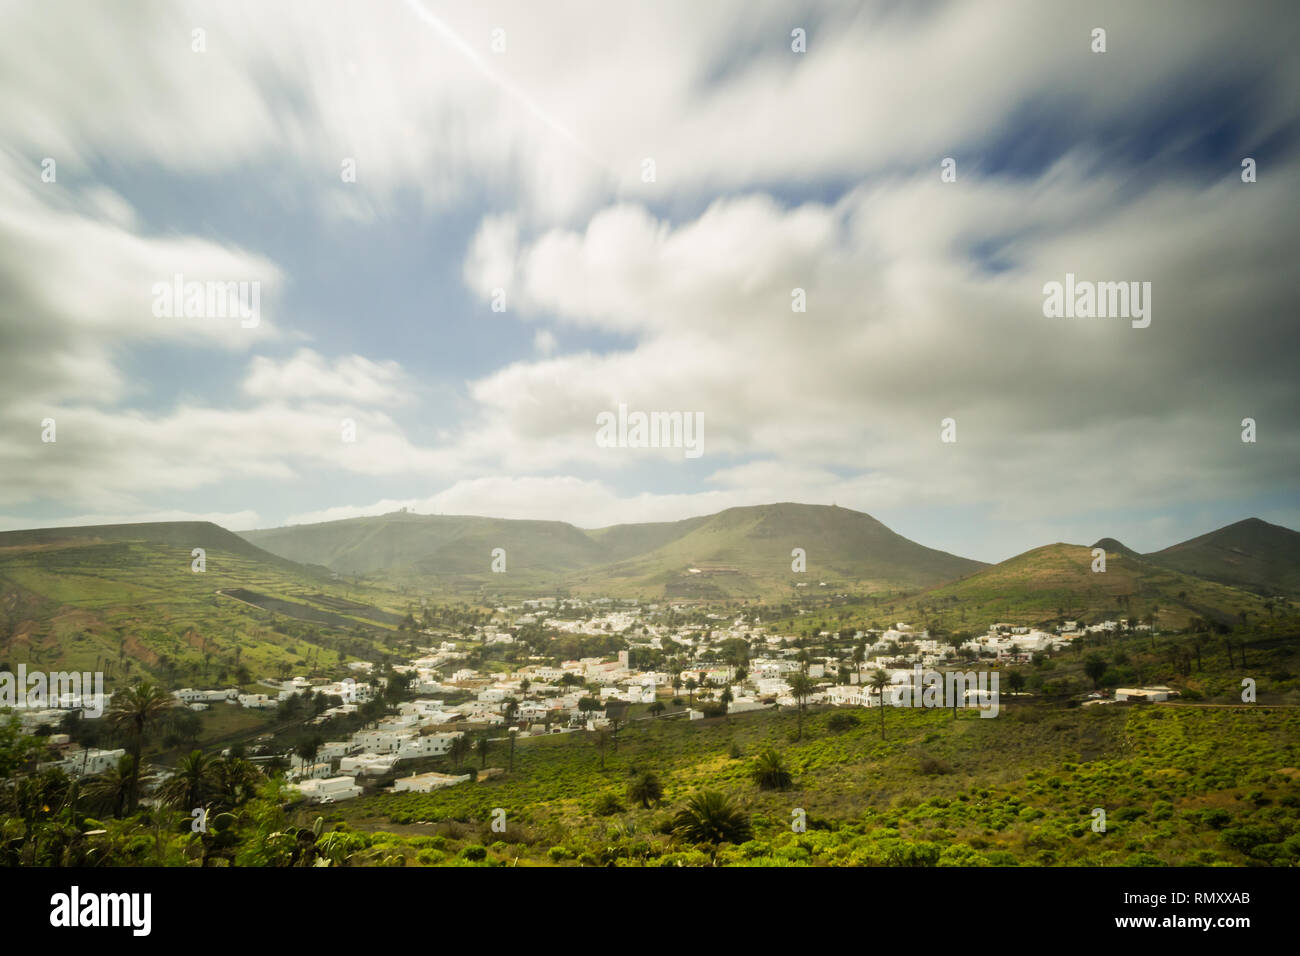 View of Haria, the valley of the thousand palm trees in Lanzarote, Canary Islands Stock Photo